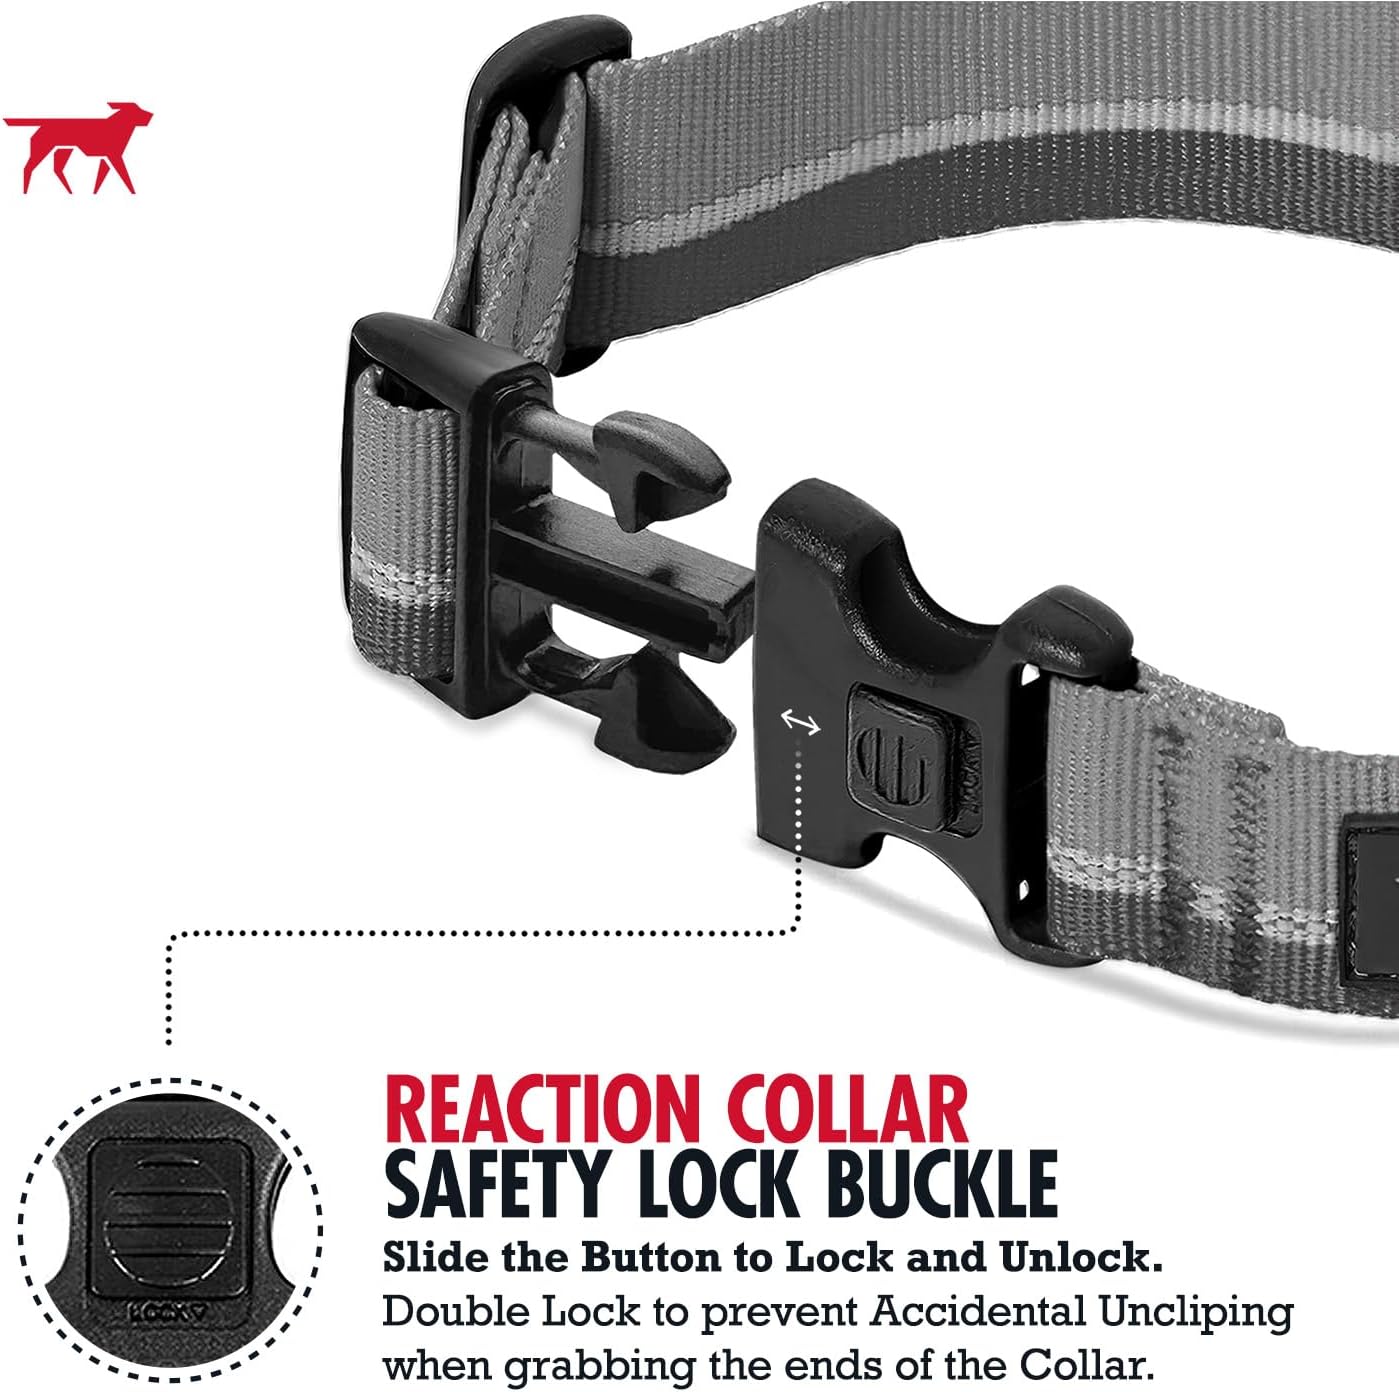 Tuff Pupper Martingale Collar for Dogs | Gentle Nylon  Steel Chain Limited Cinch Design is Perfect for Training | Dual Leash Attachment Points | Durable Quick Release Buckle | Sizing for All Breeds